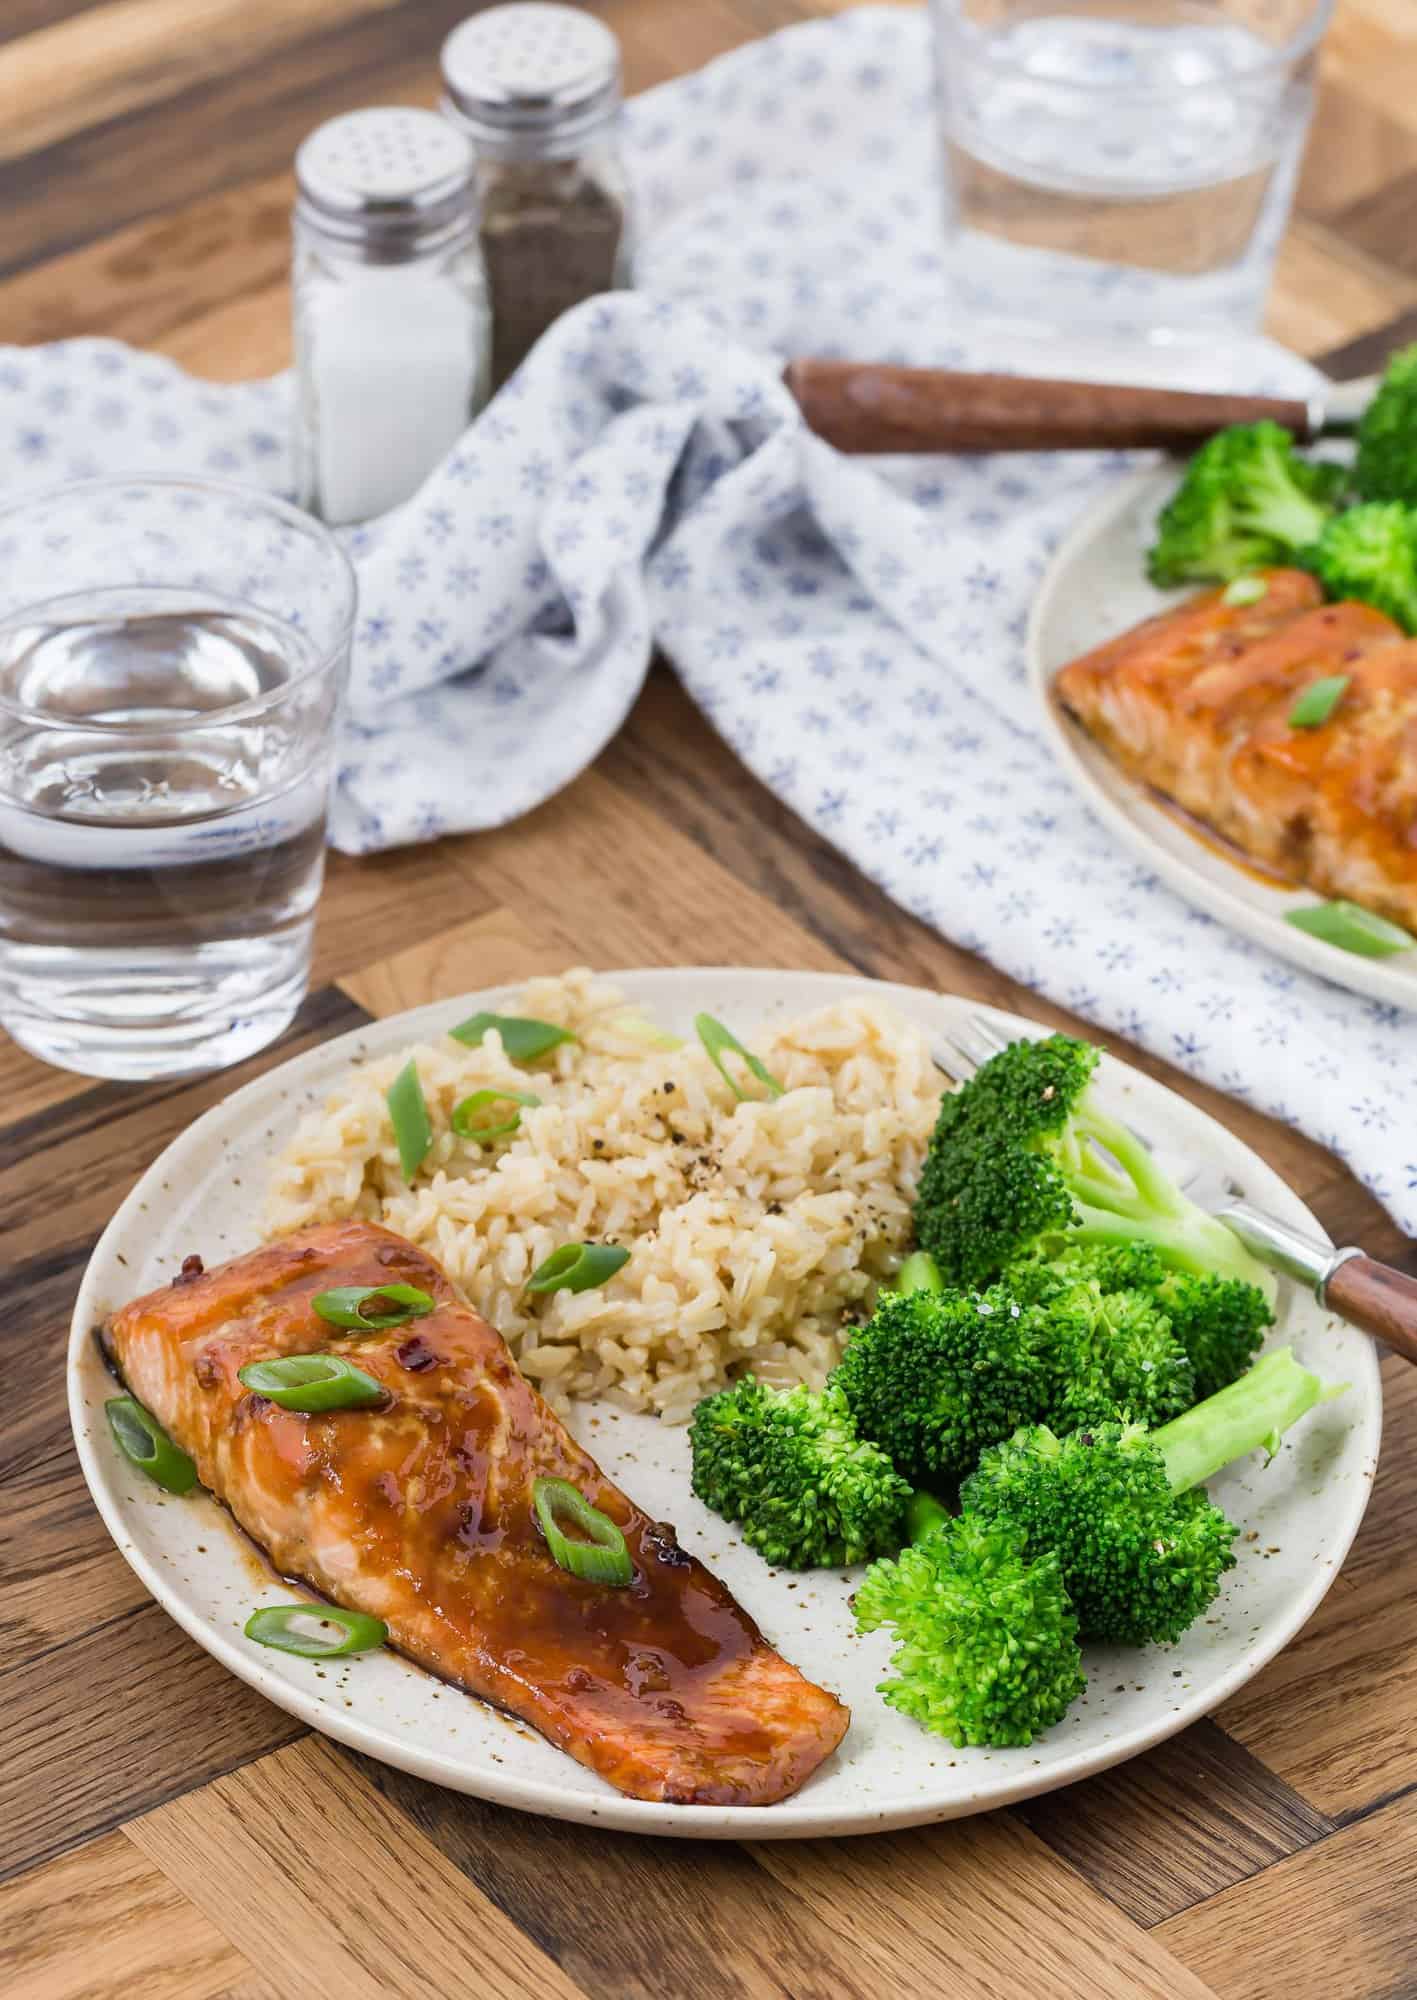 Salmon glazed with honey and soy on a plate with broccoli and rice.